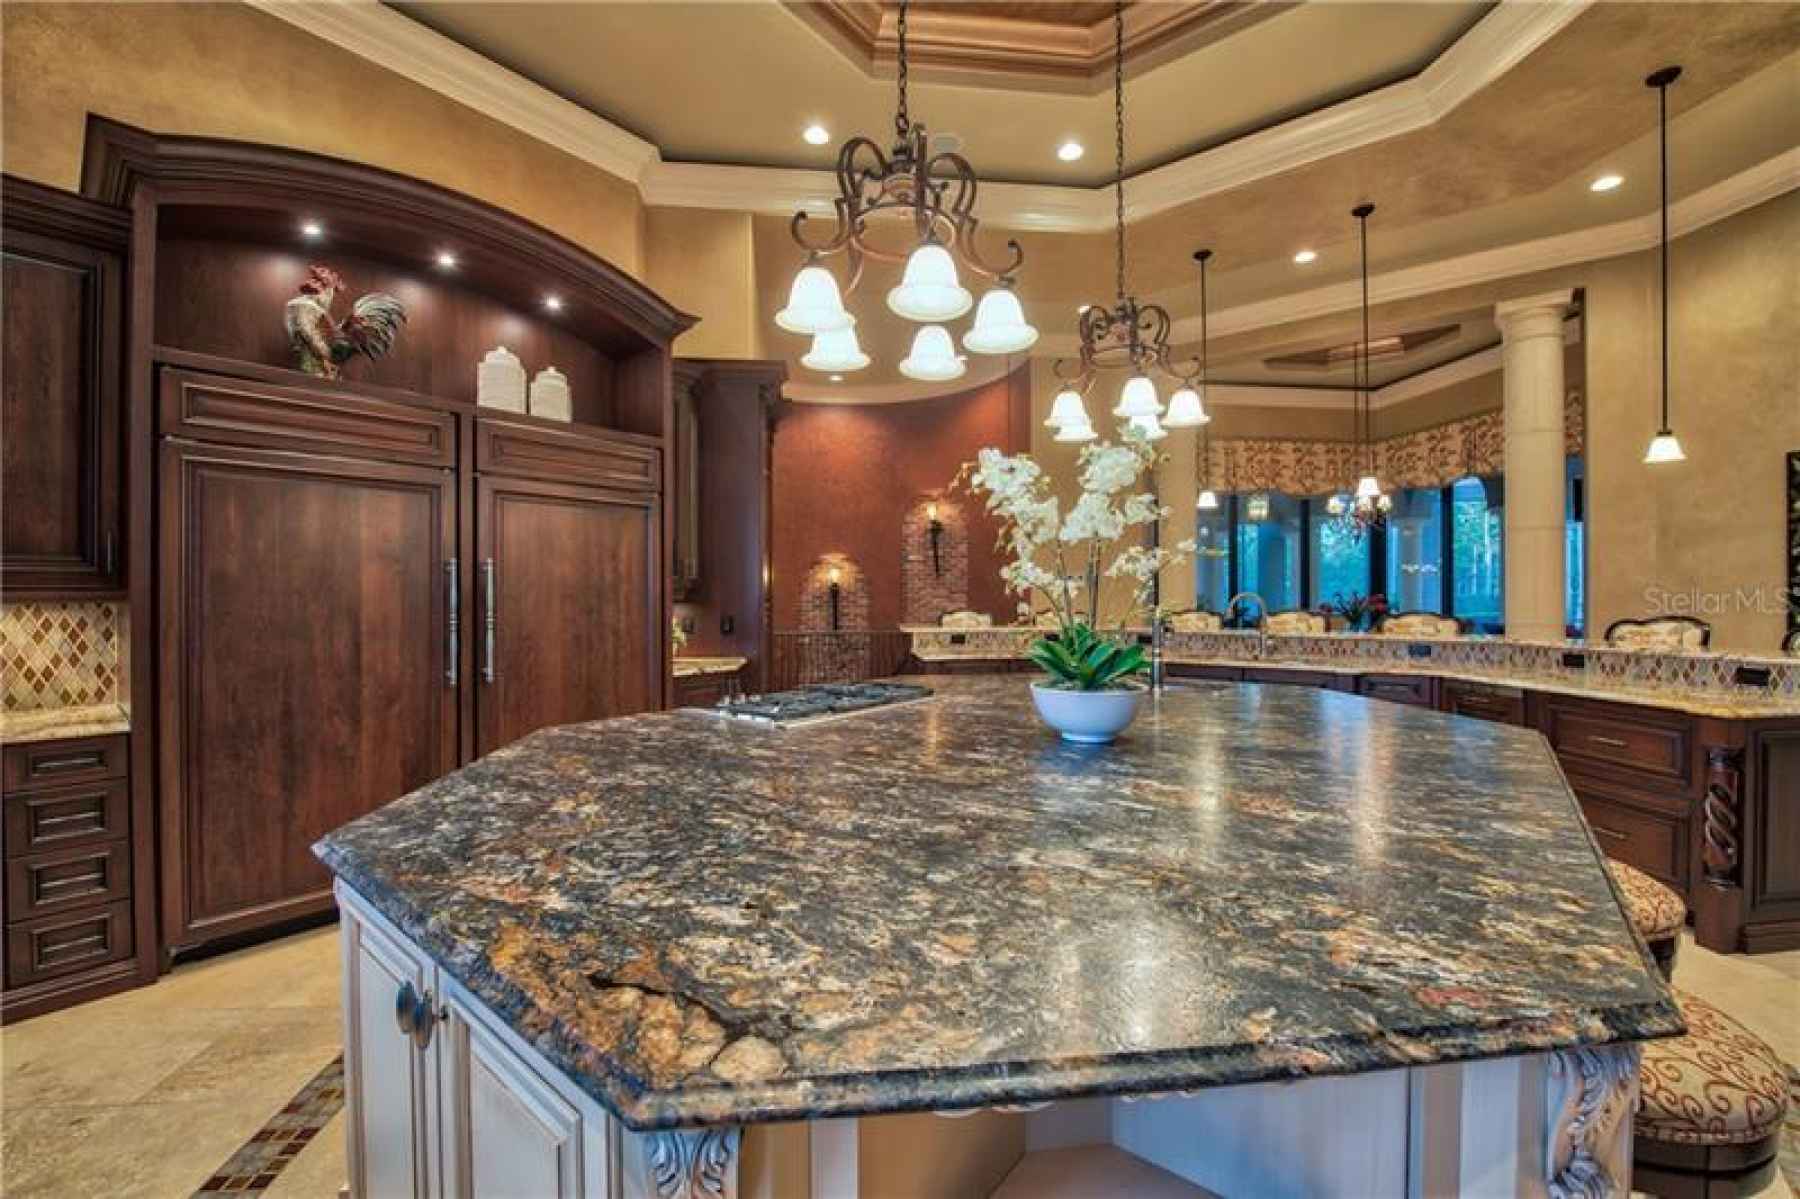 Center Island features Range and Leathered Granite Counters